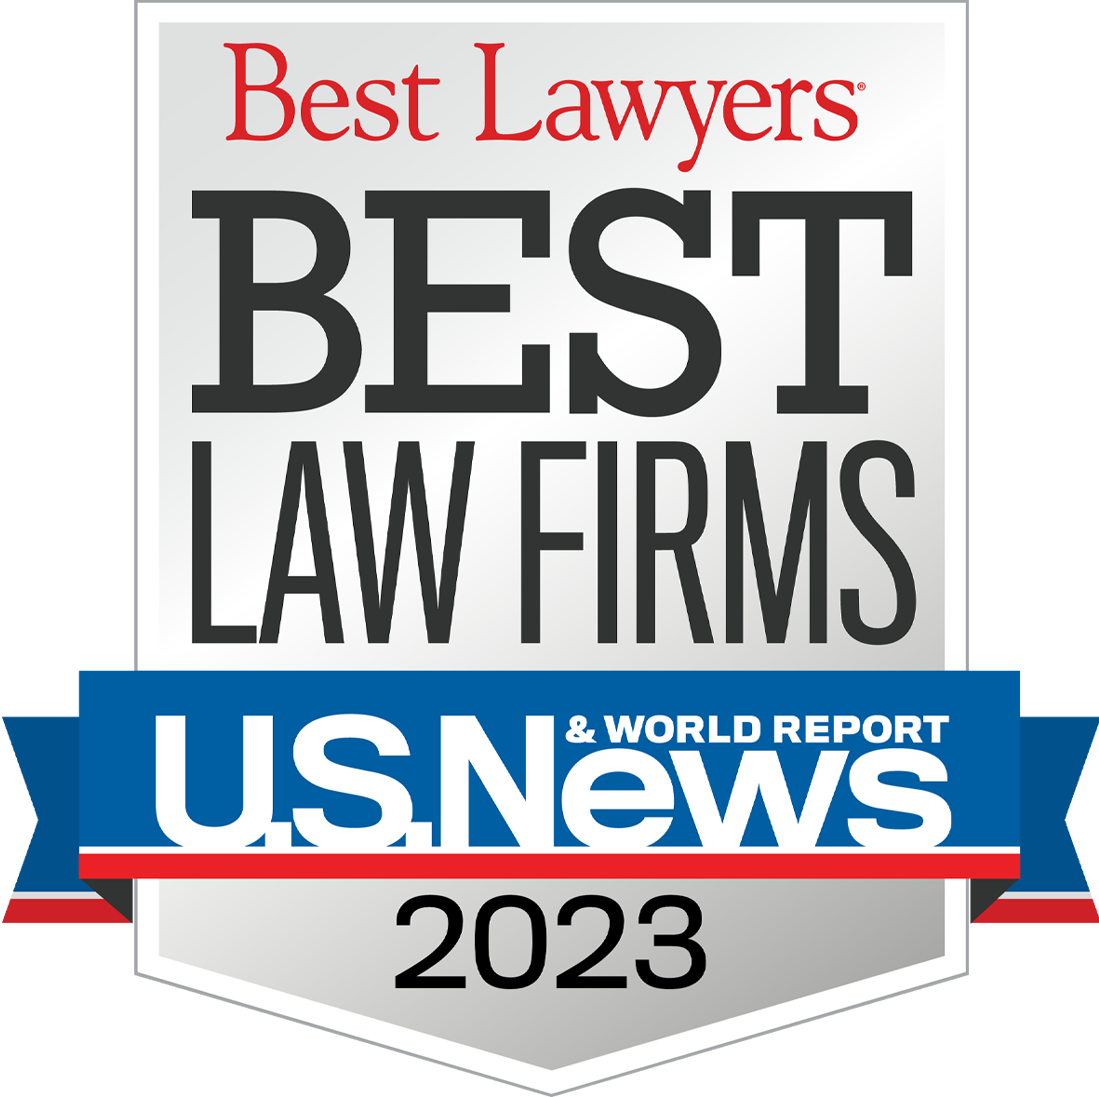 2023 best lawyers and best law firms by U.S. News and World Report badge.